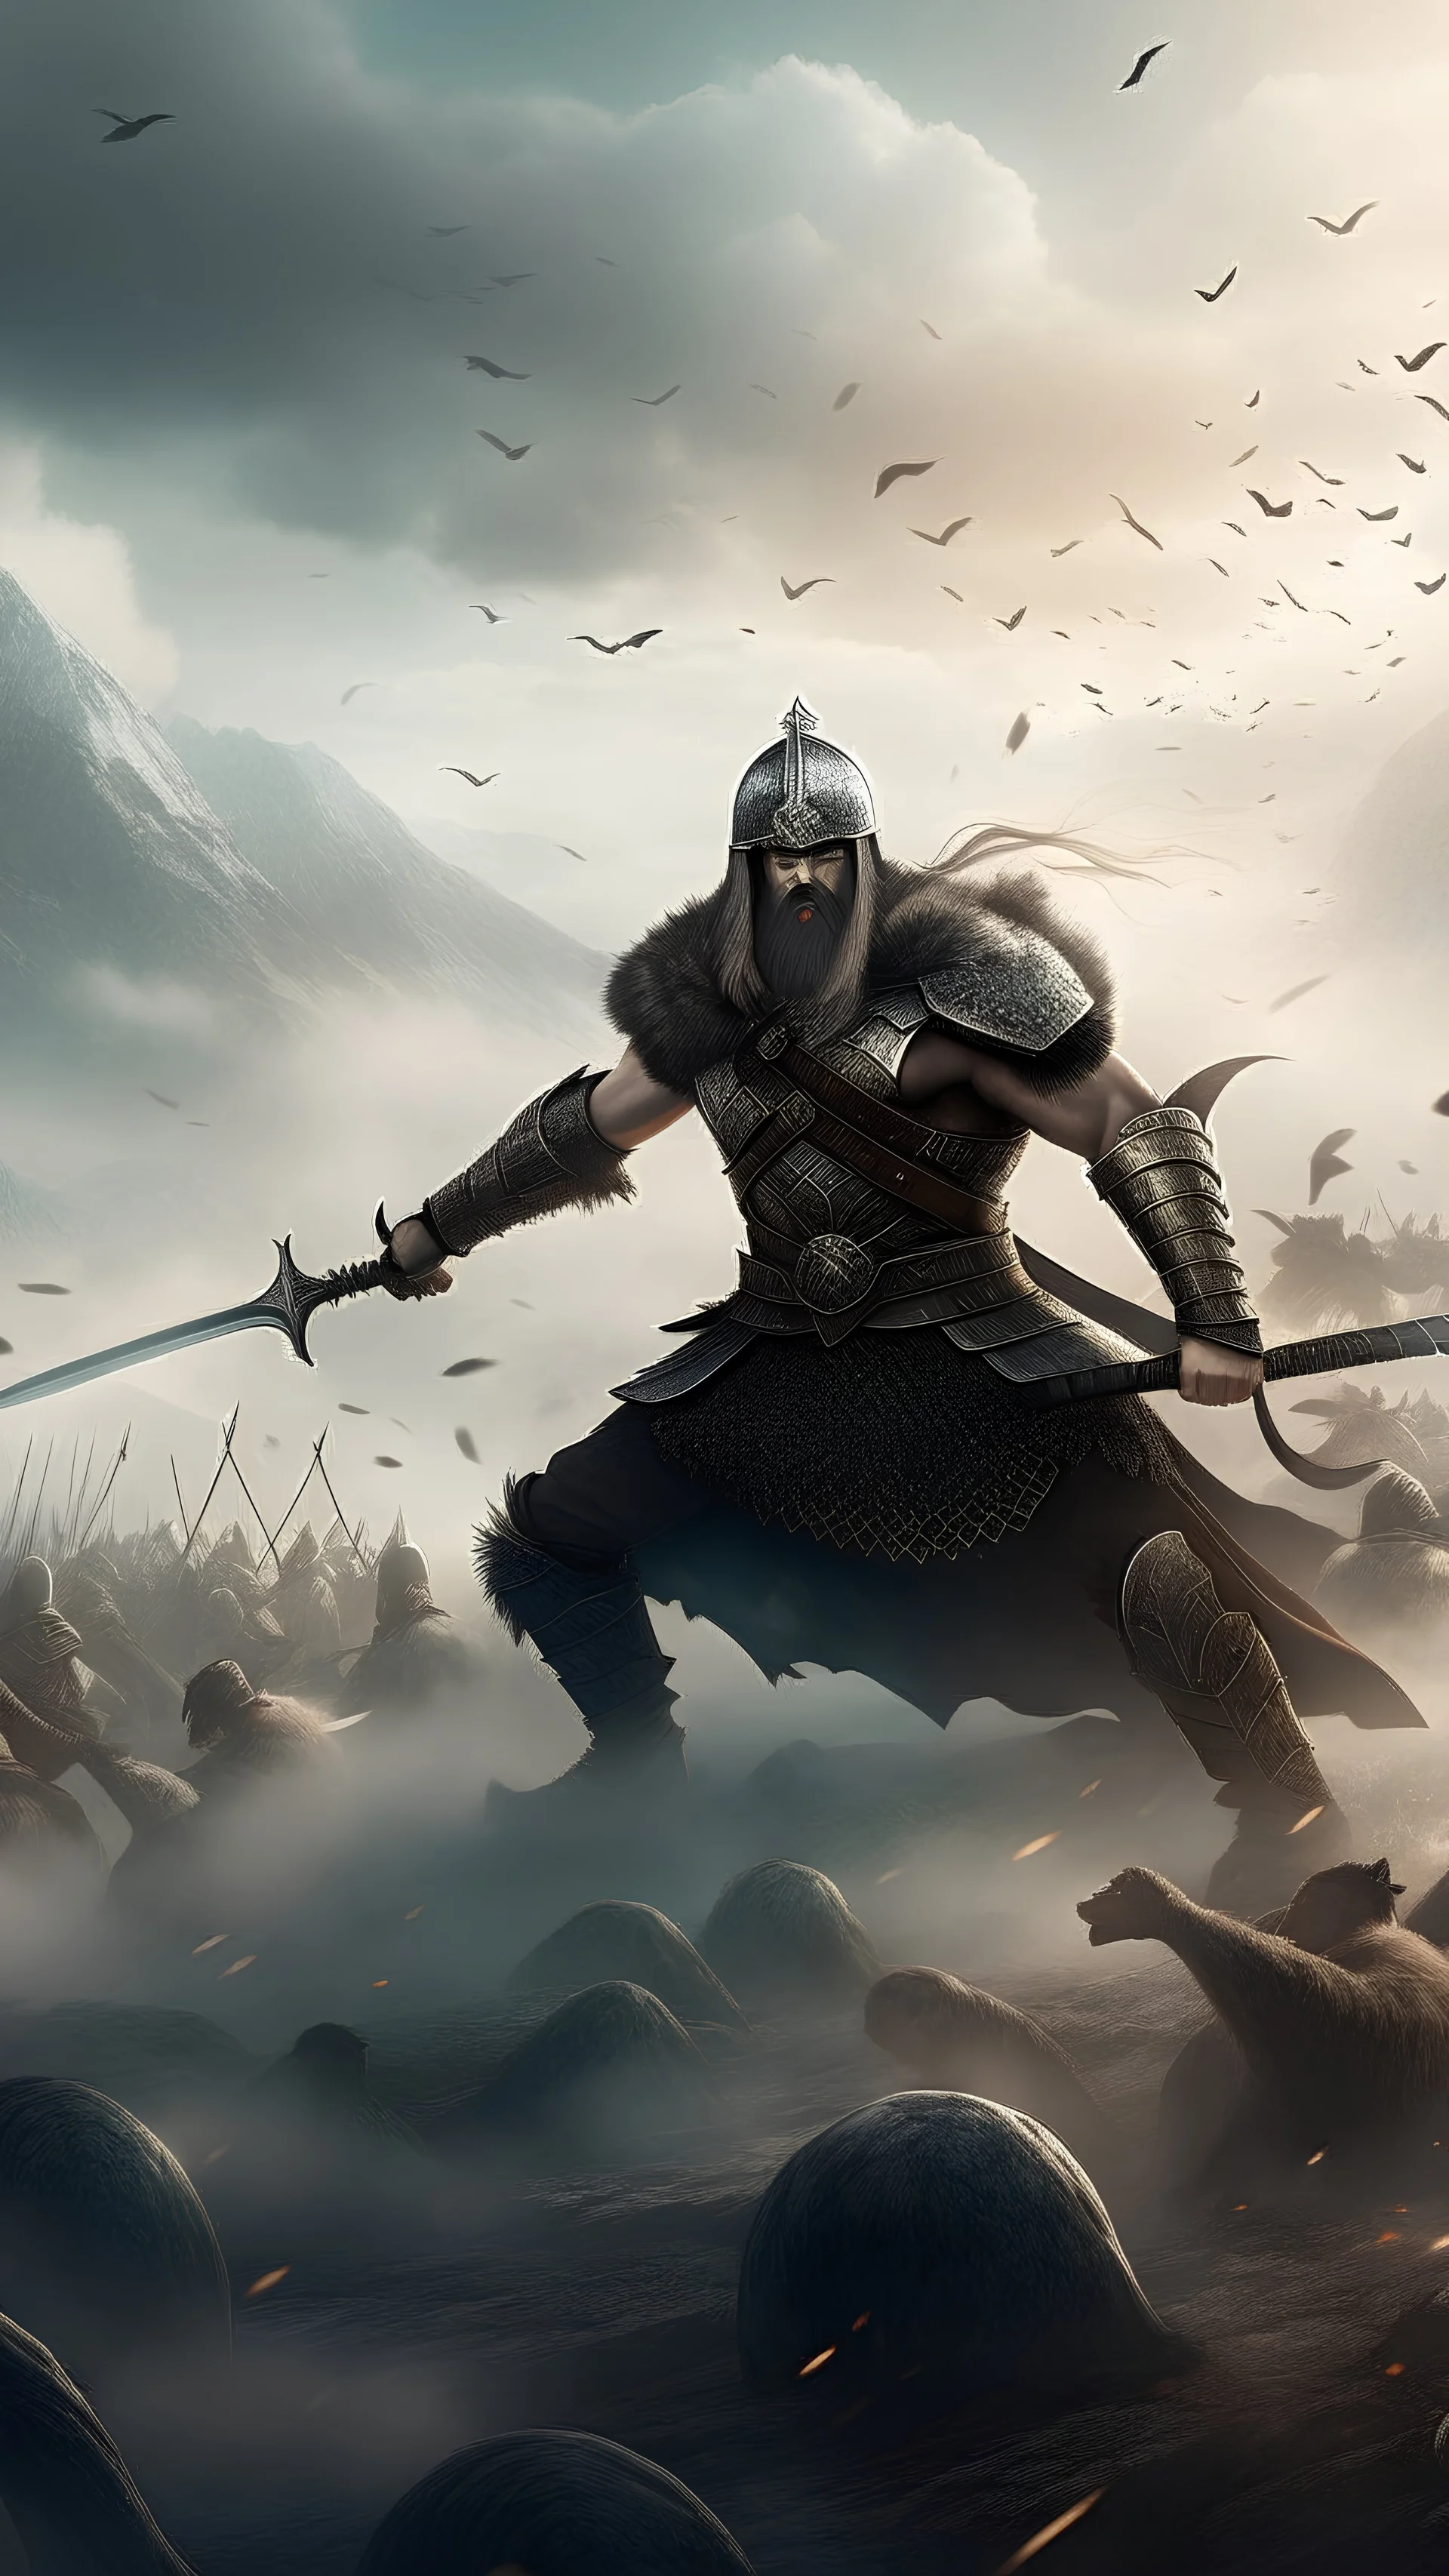 an epic battle scene featuring a powerful Viking leading a charge against mythical creatures. Capture the intensity of the moment with detailed weapons, armor, and swirling dust in a vast, ancient landscape.